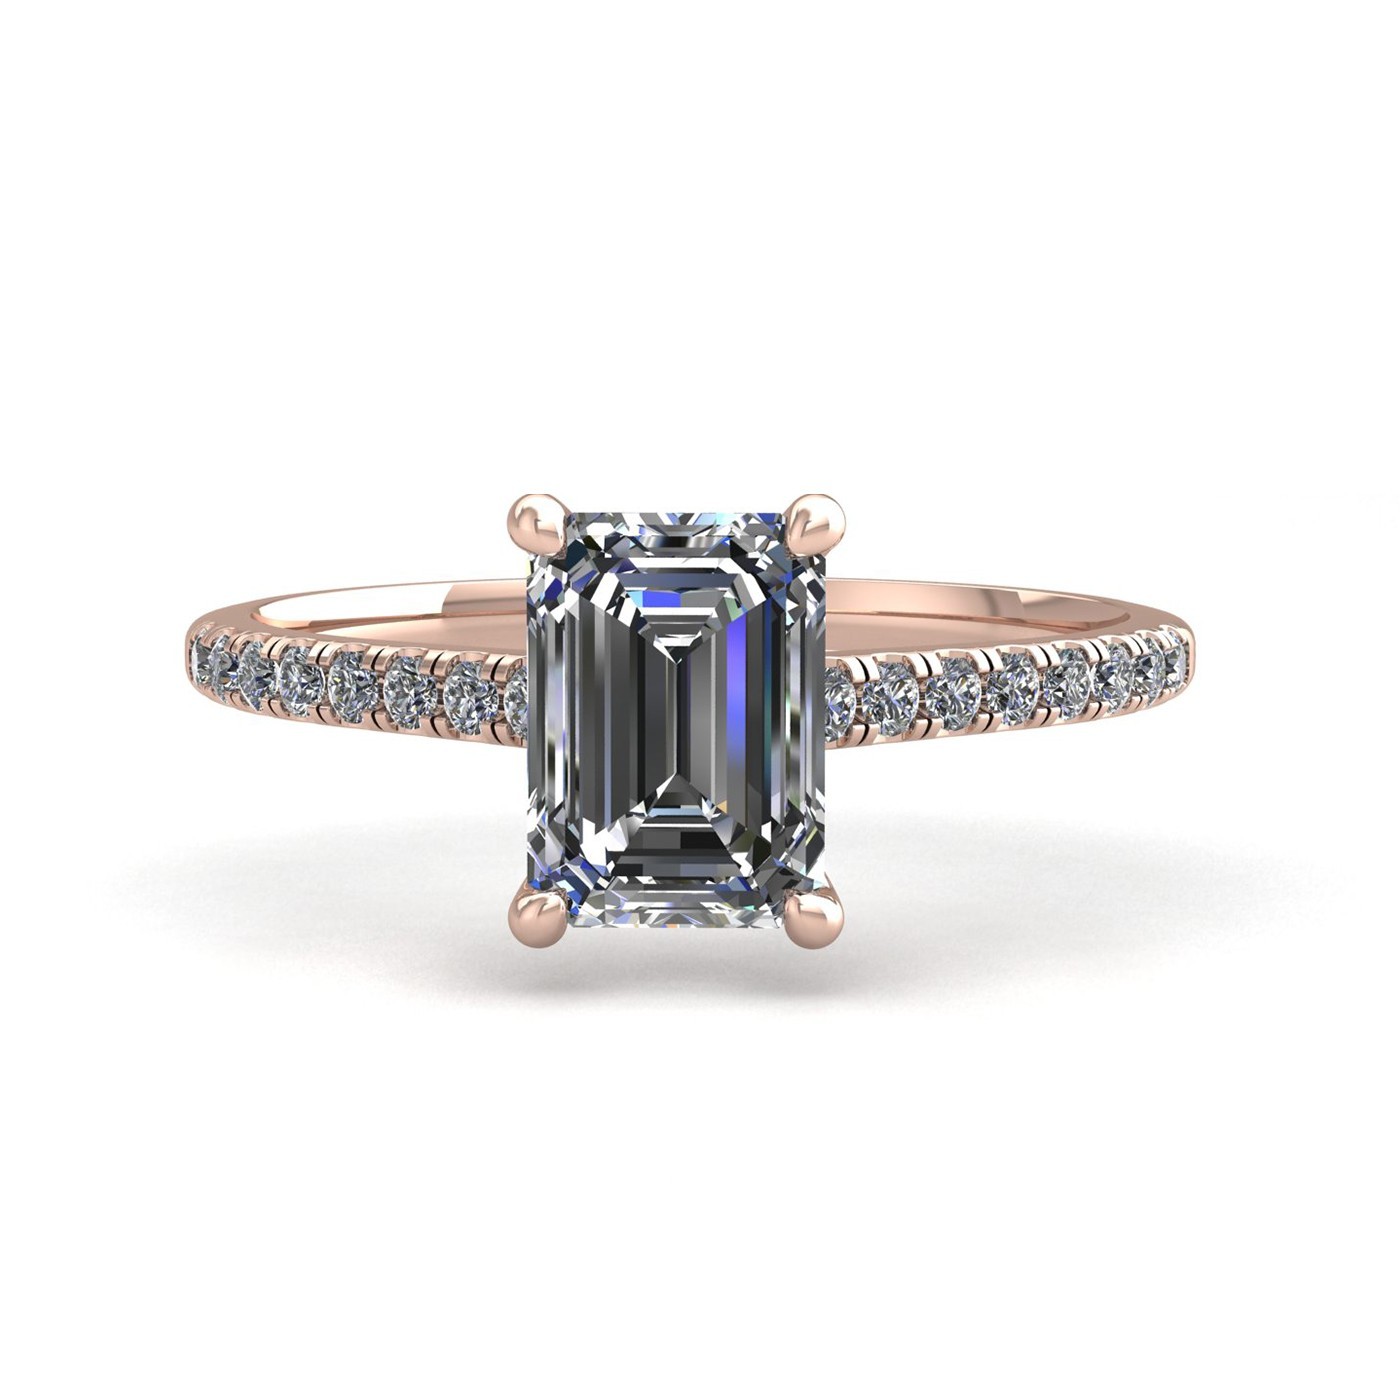 18k rose gold  0,30 ct 4 prongs emerald cut diamond engagement ring with whisper thin pavÉ set band Photos & images